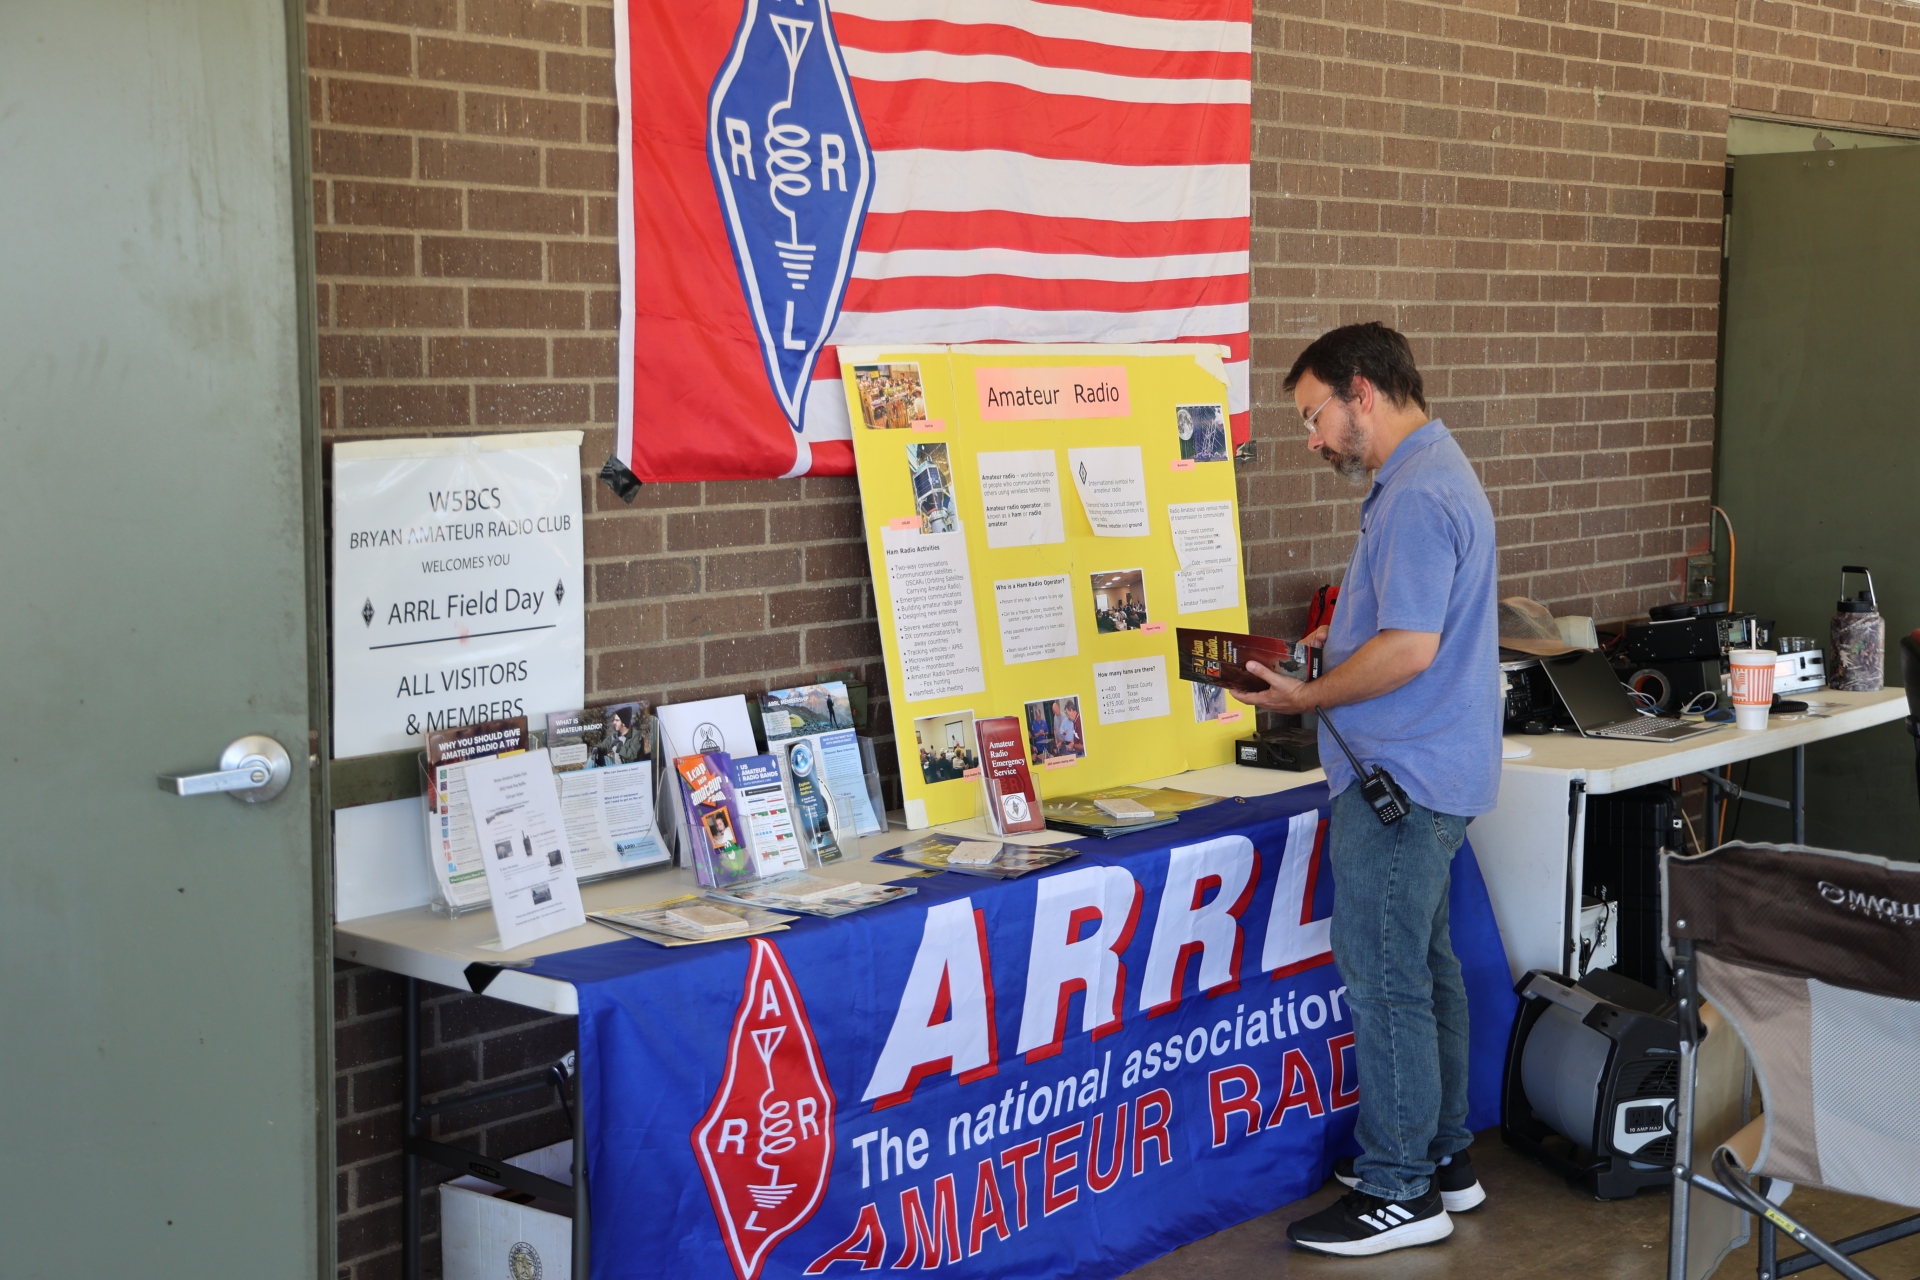 A person reads material about amateur radio at a public information table.